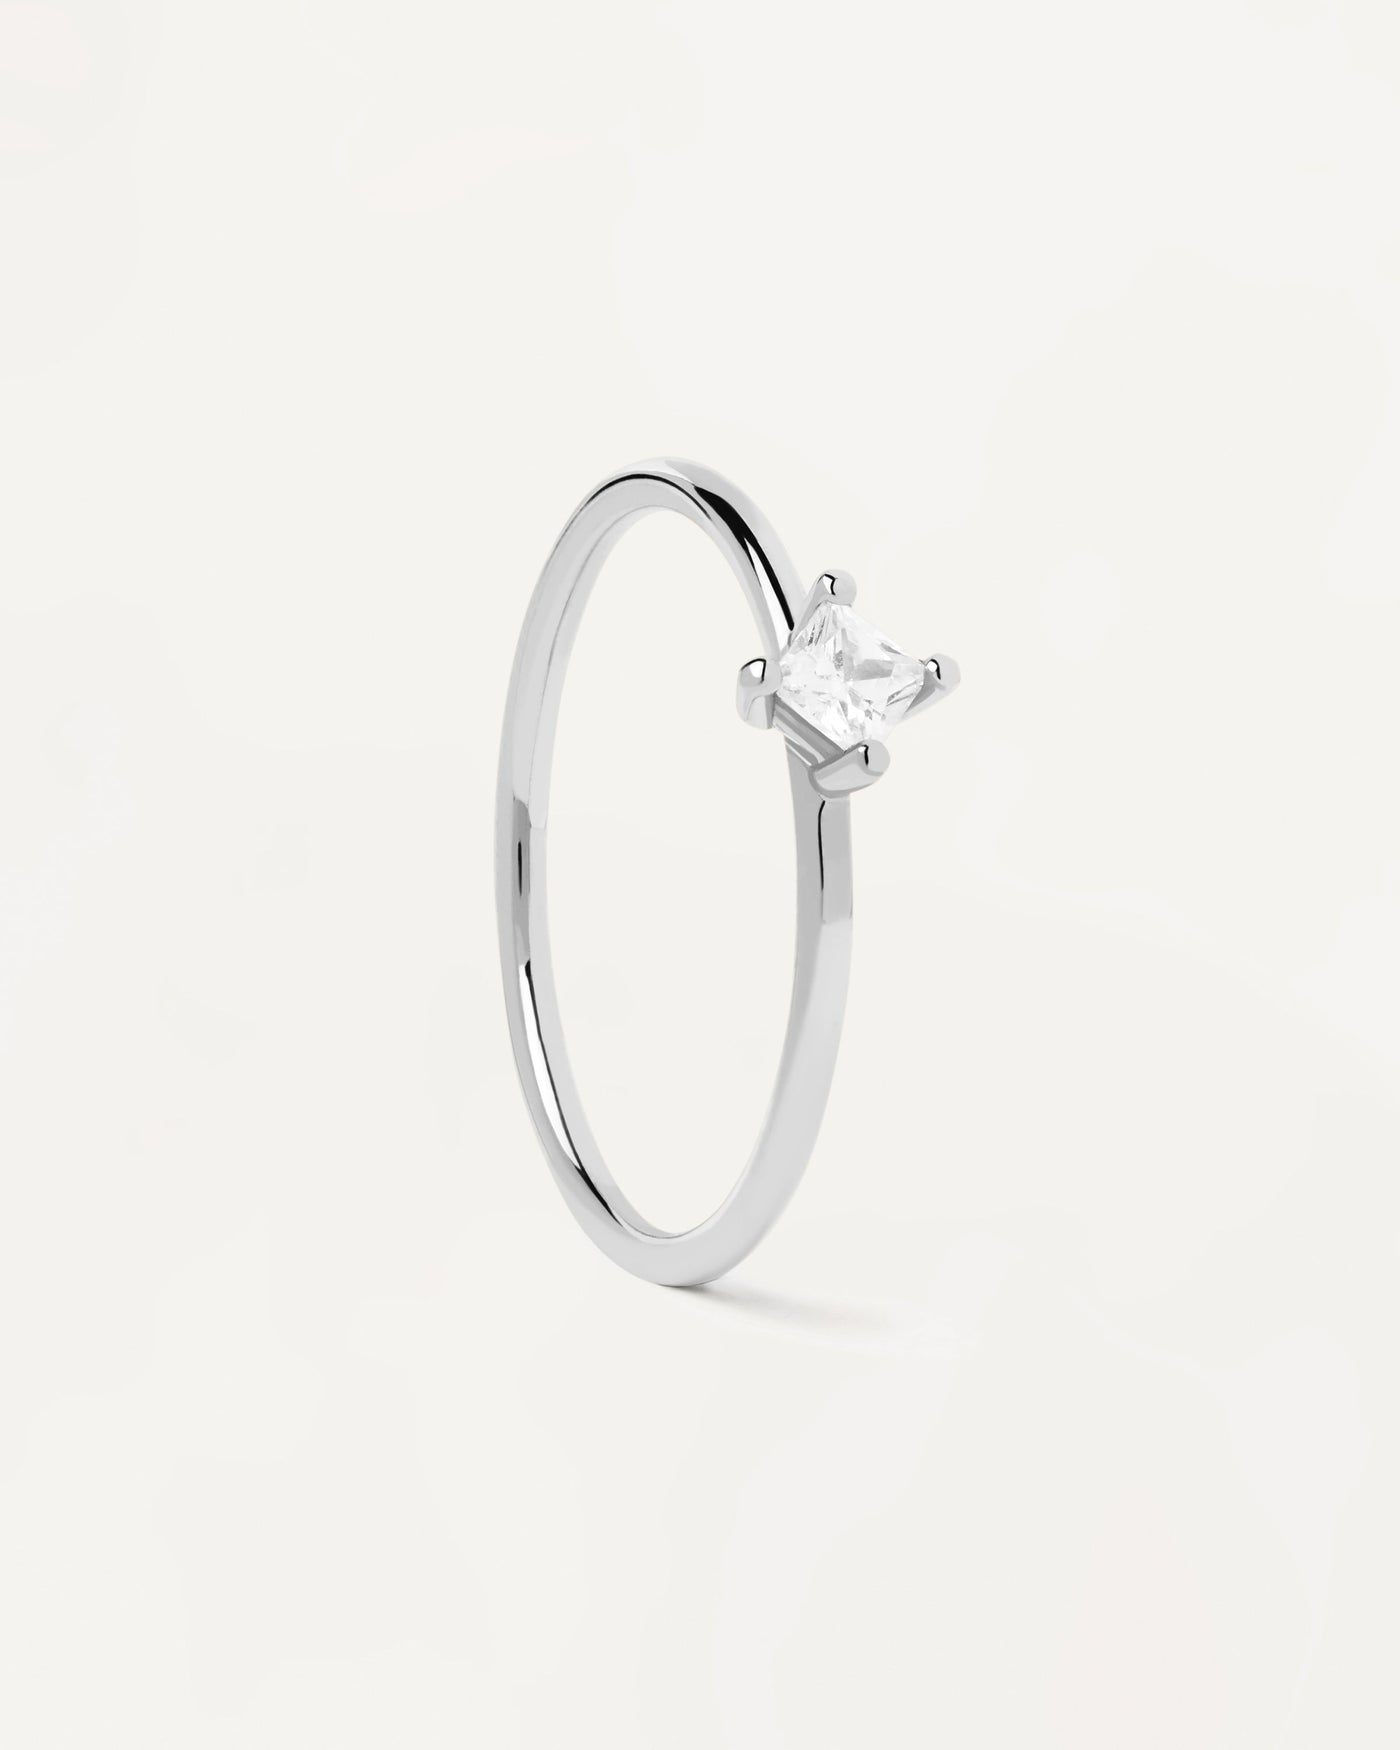 2023 Selection | Square Diamond And White Gold Solitaire Ring. Solid white gold ring with squared princess diamond lab-grown of 0.17 carat. Get the latest arrival from PDPAOLA. Place your order safely and get this Best Seller. Free Shipping.